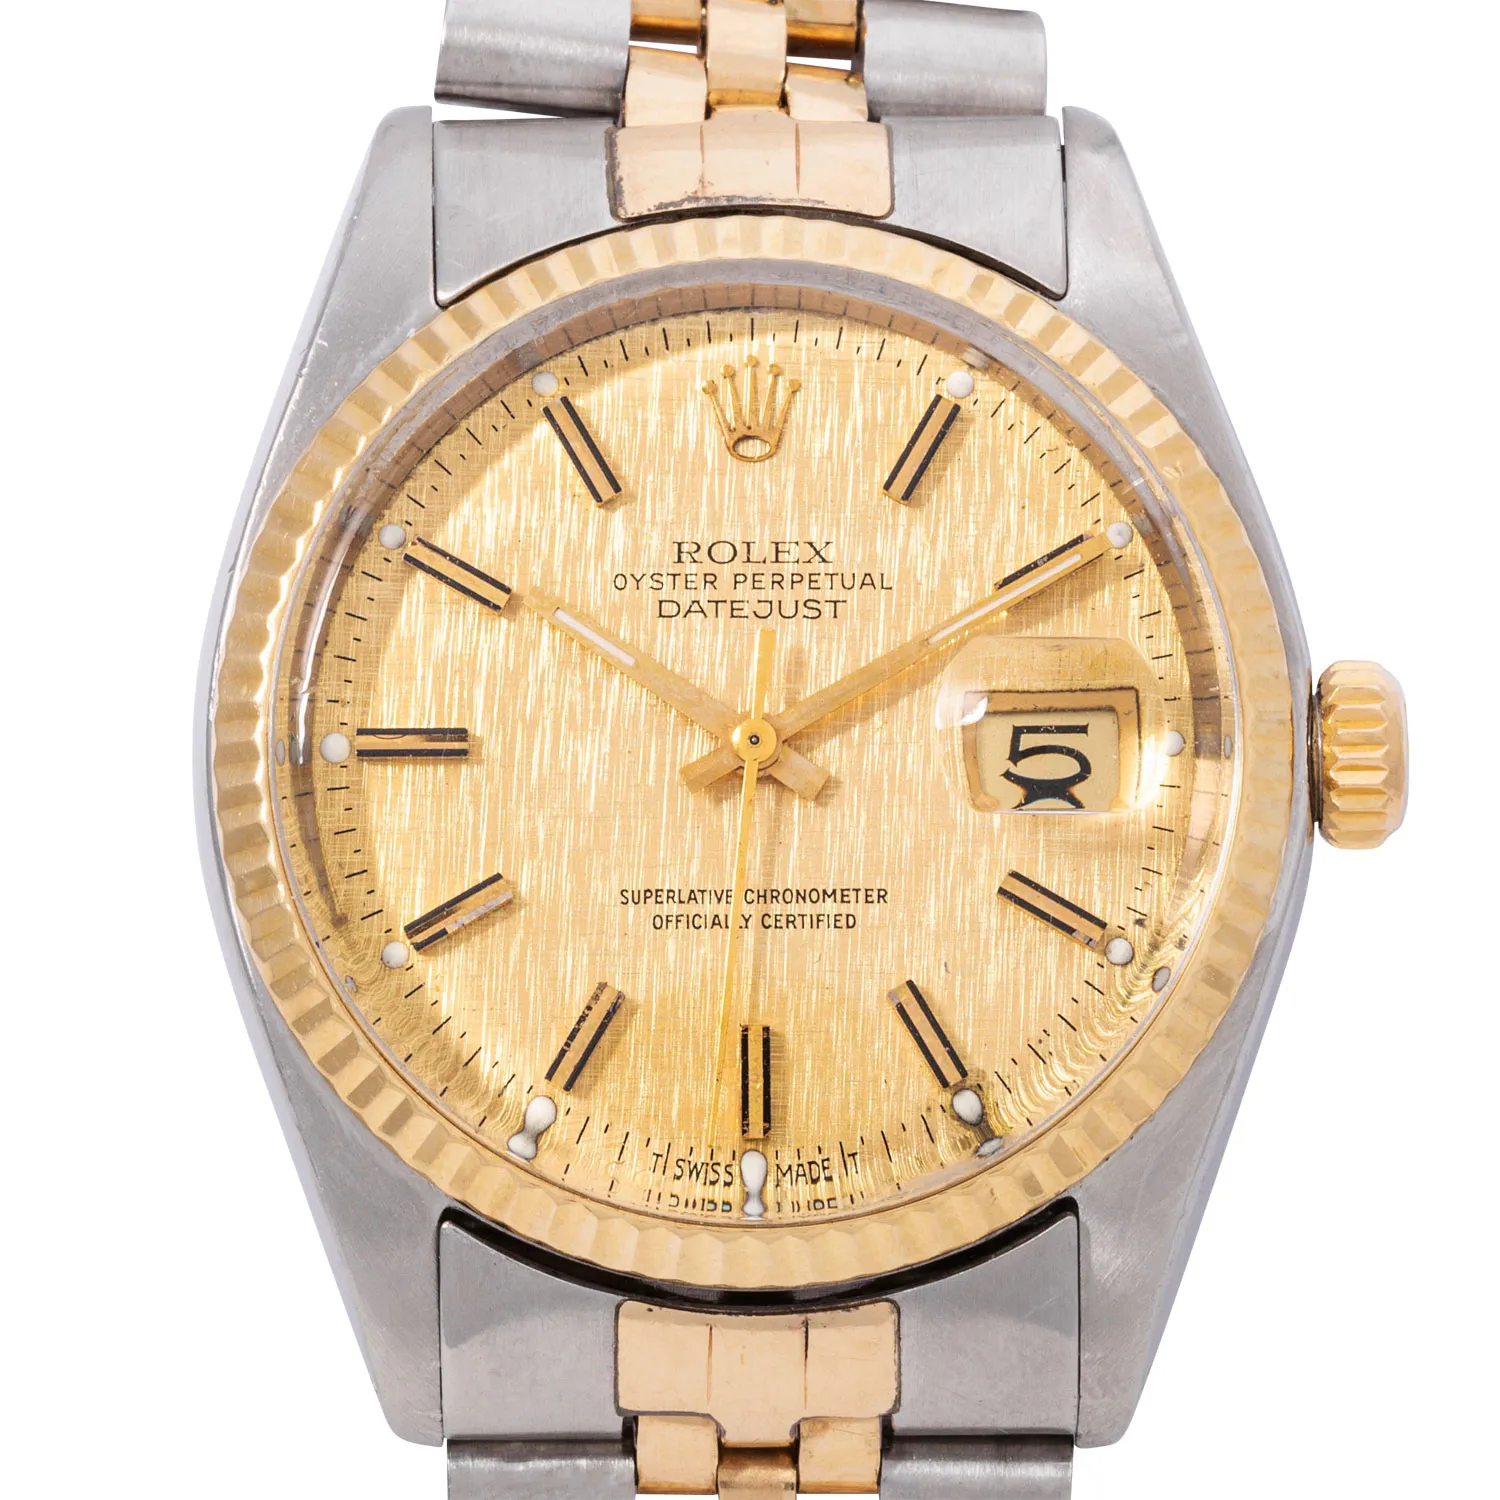 Rolex Datejust 36 16013 36mm Yellow gold and stainless steel Gold-coloured